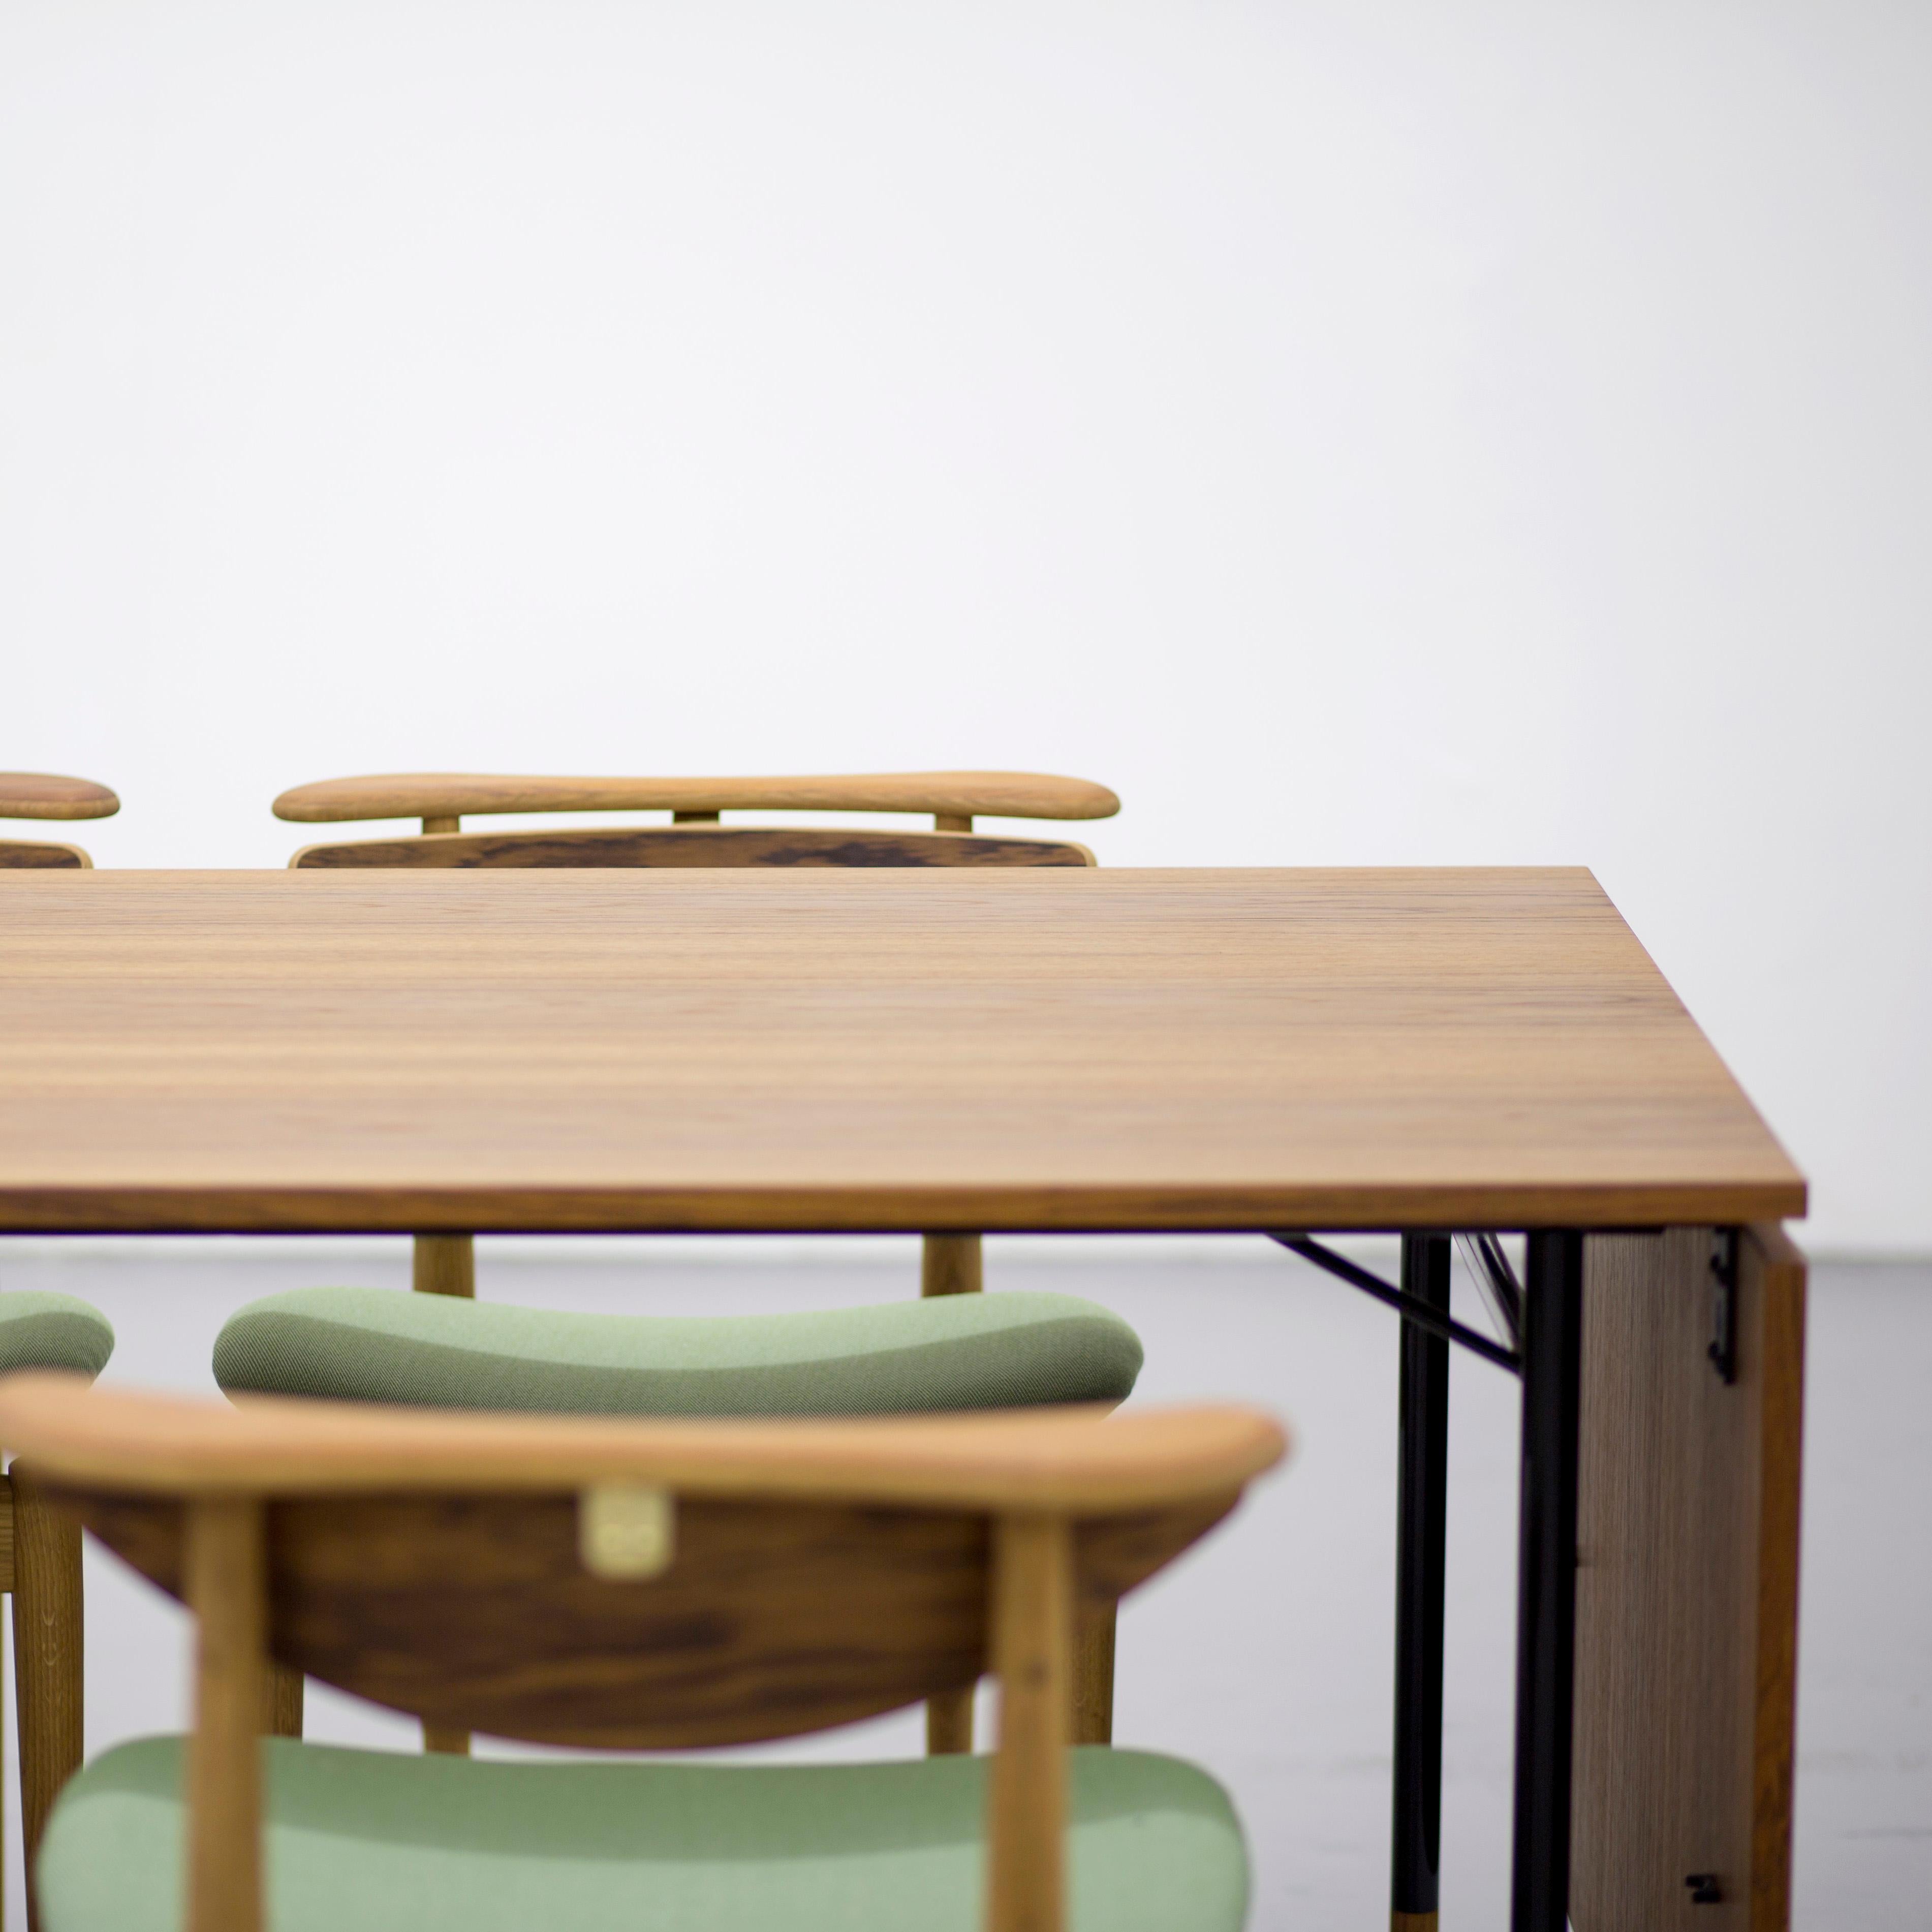 Finn Juhl Nyhavn Dining Table with Two Drop Leaves, Lino and Wood 12